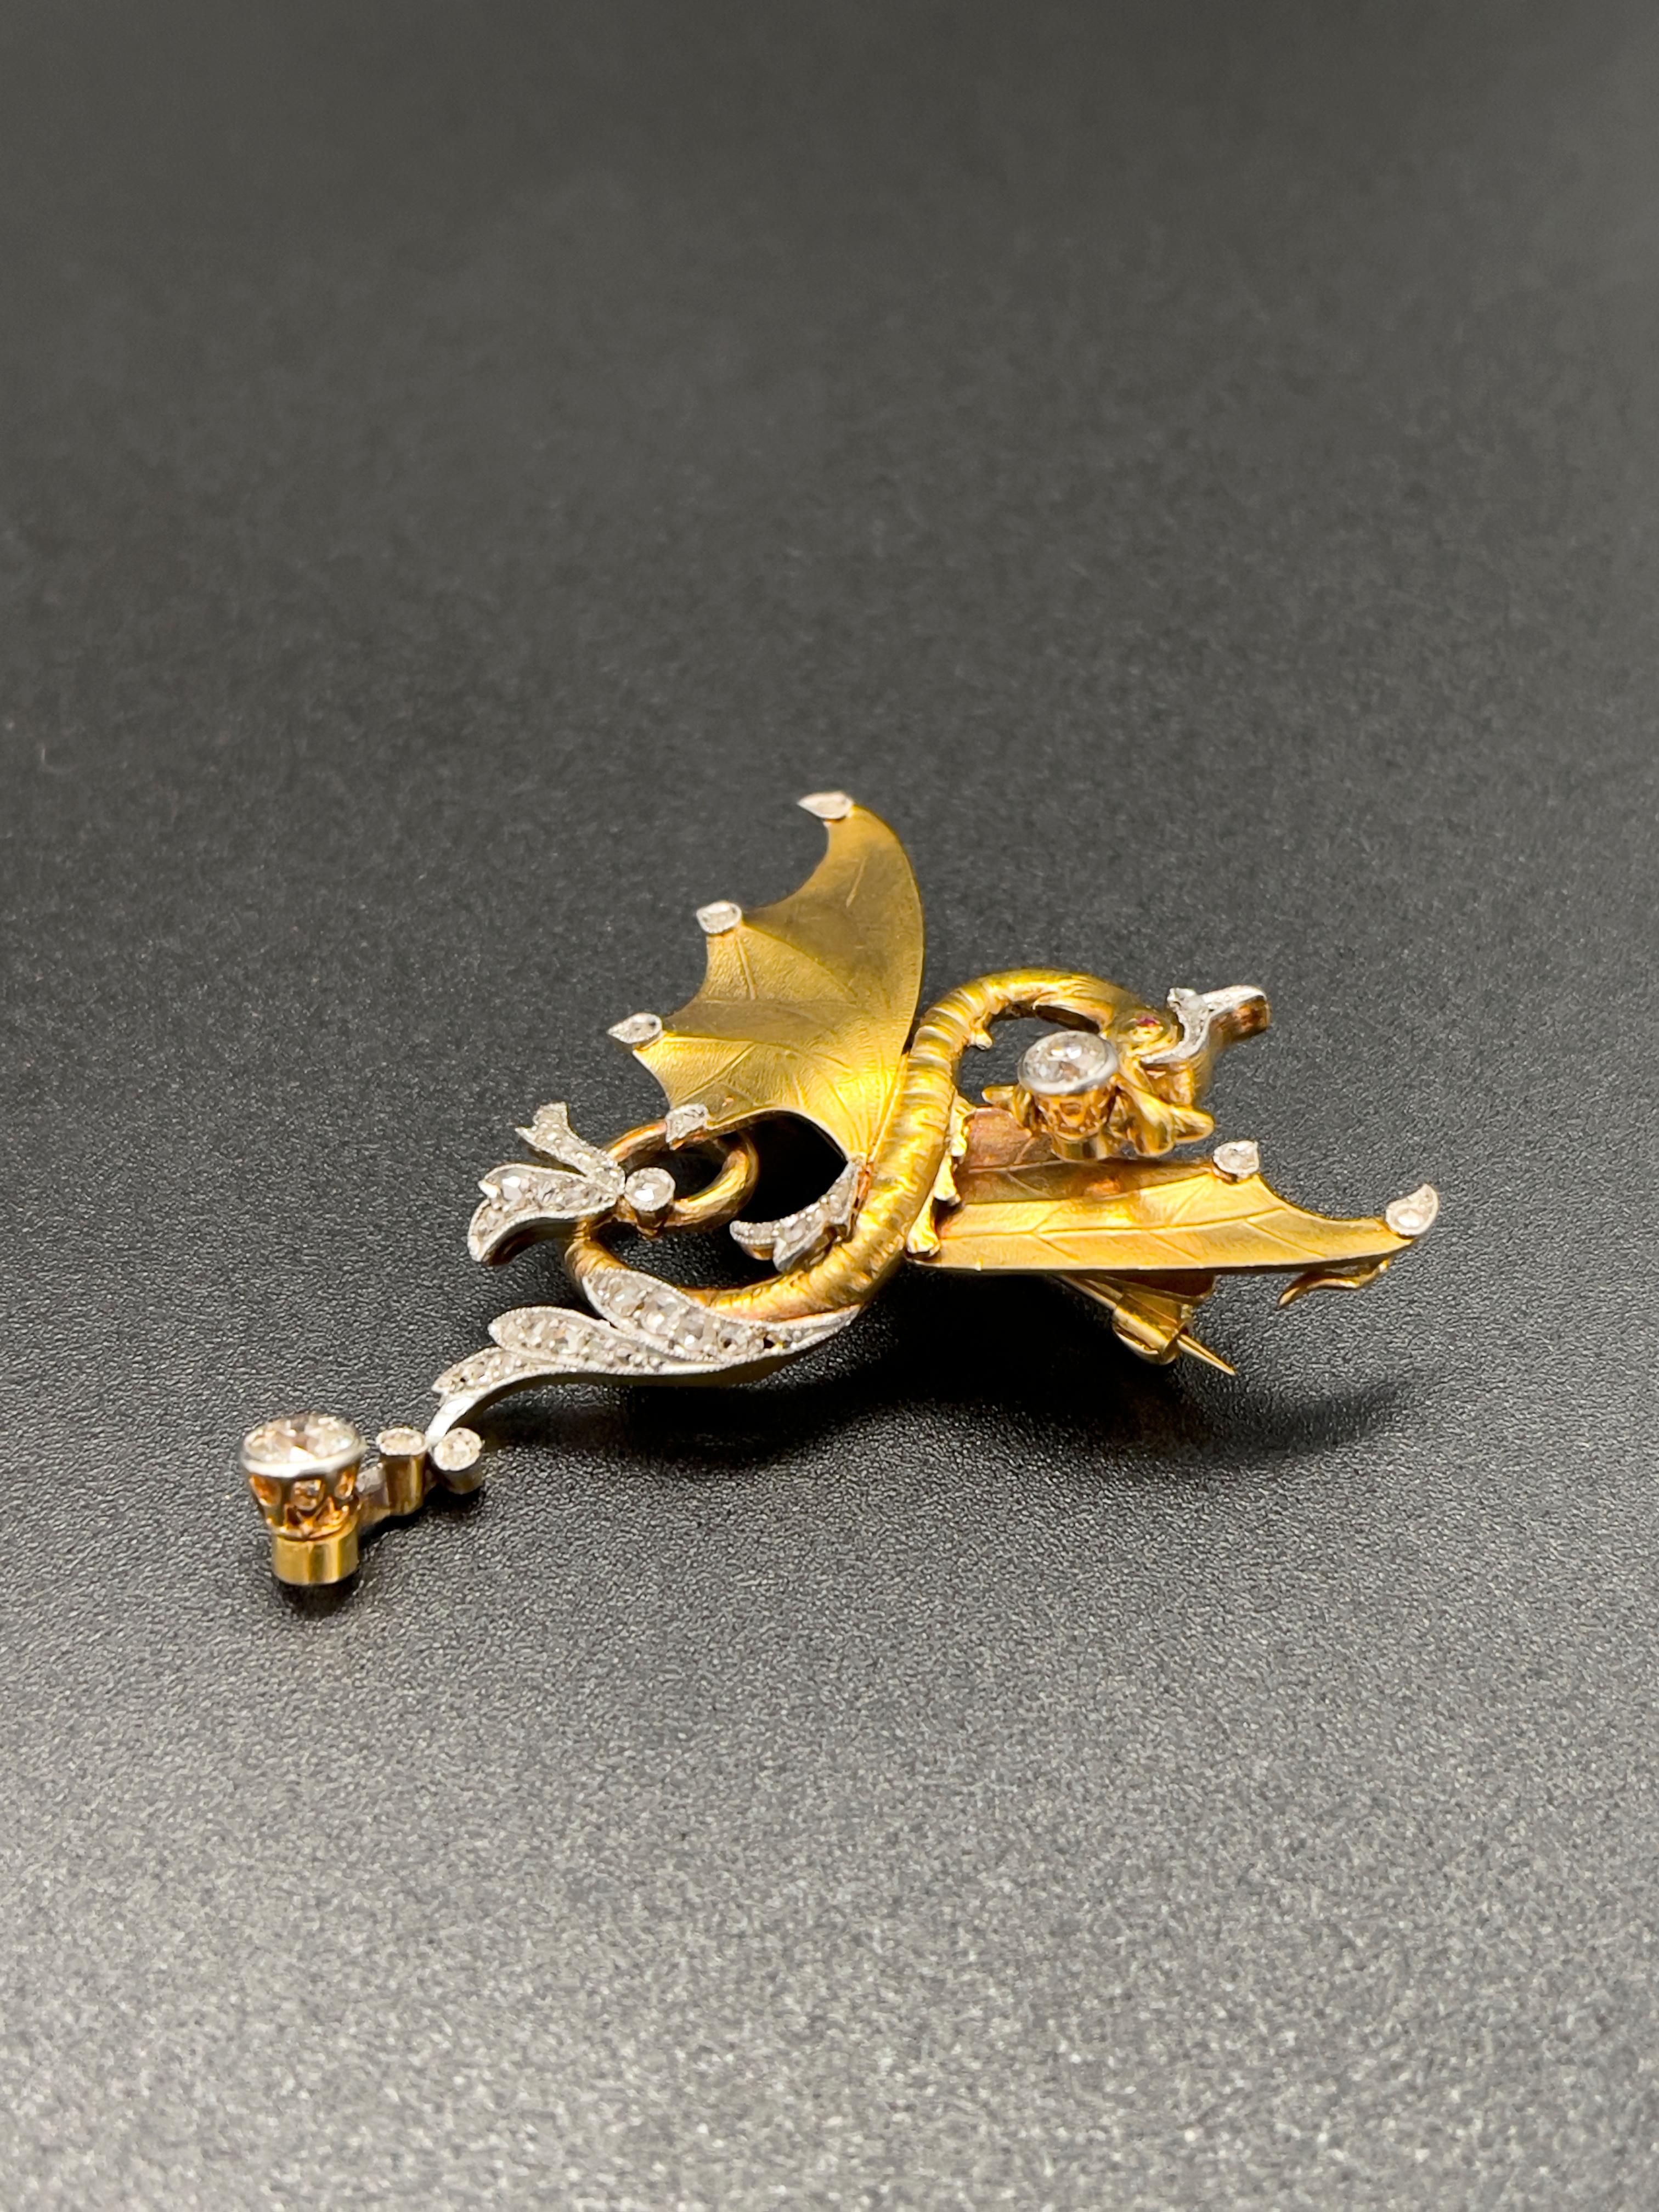  Animal Dragon Diamonds Gold 1890s Chinese Imperial Pendant or Brooch In Excellent Condition For Sale In Viana do Castelo, PT